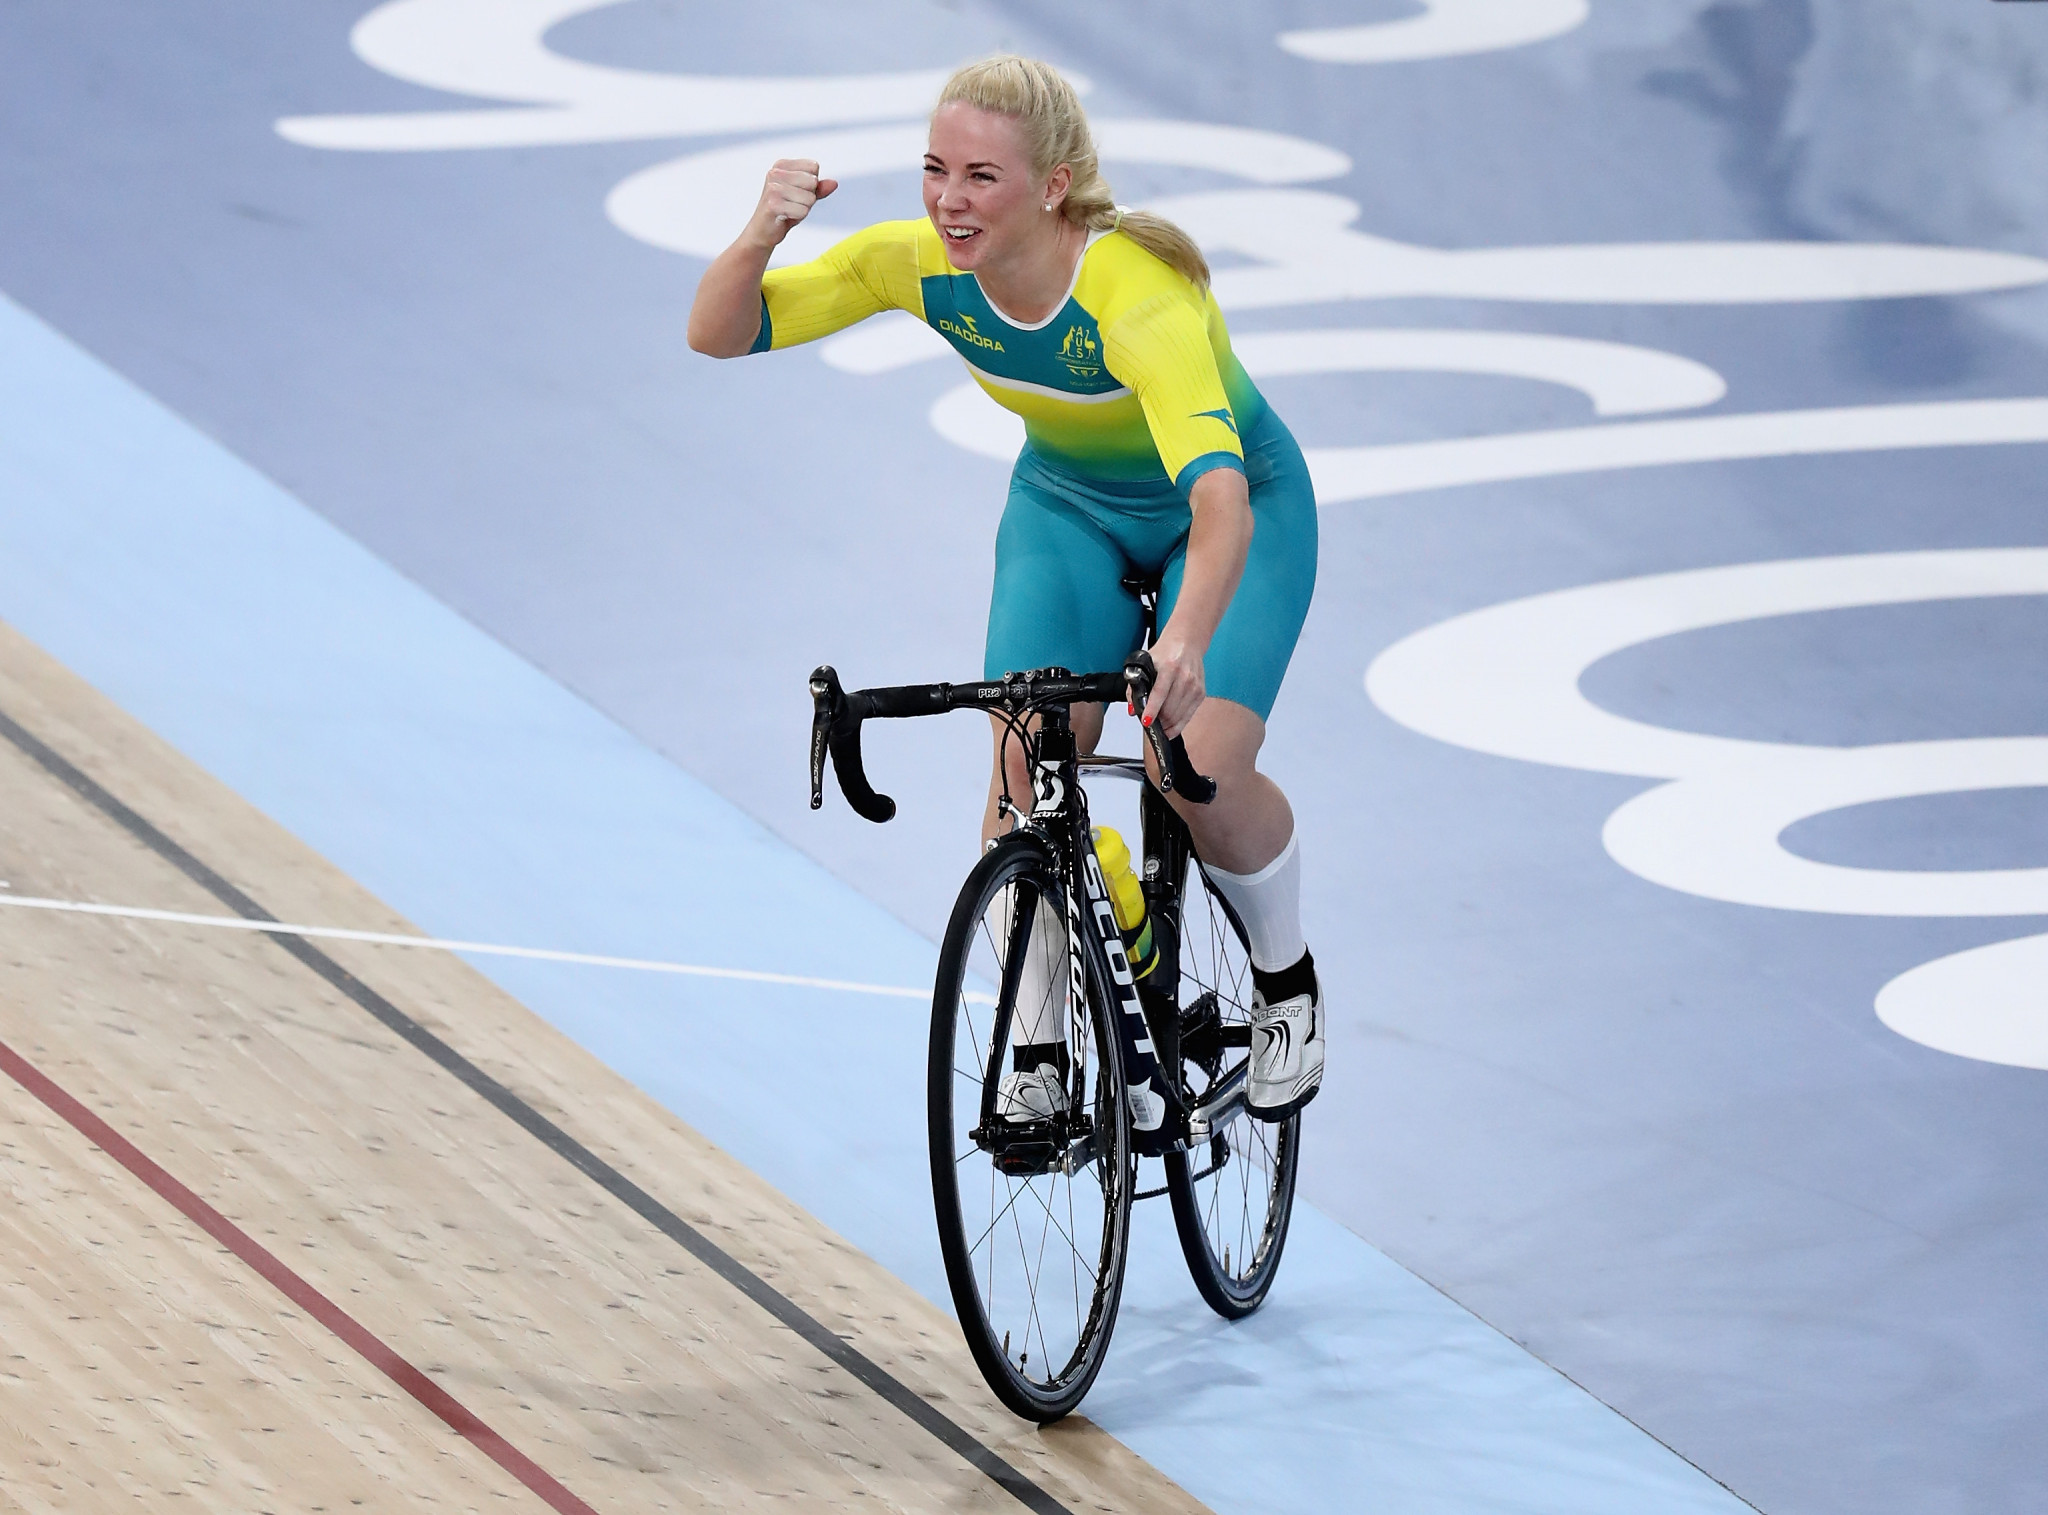 Australia's Kaarle McCulloch triumphed in the women’s 500m time trial on the penultimate night of track cycling competition ©Getty Images